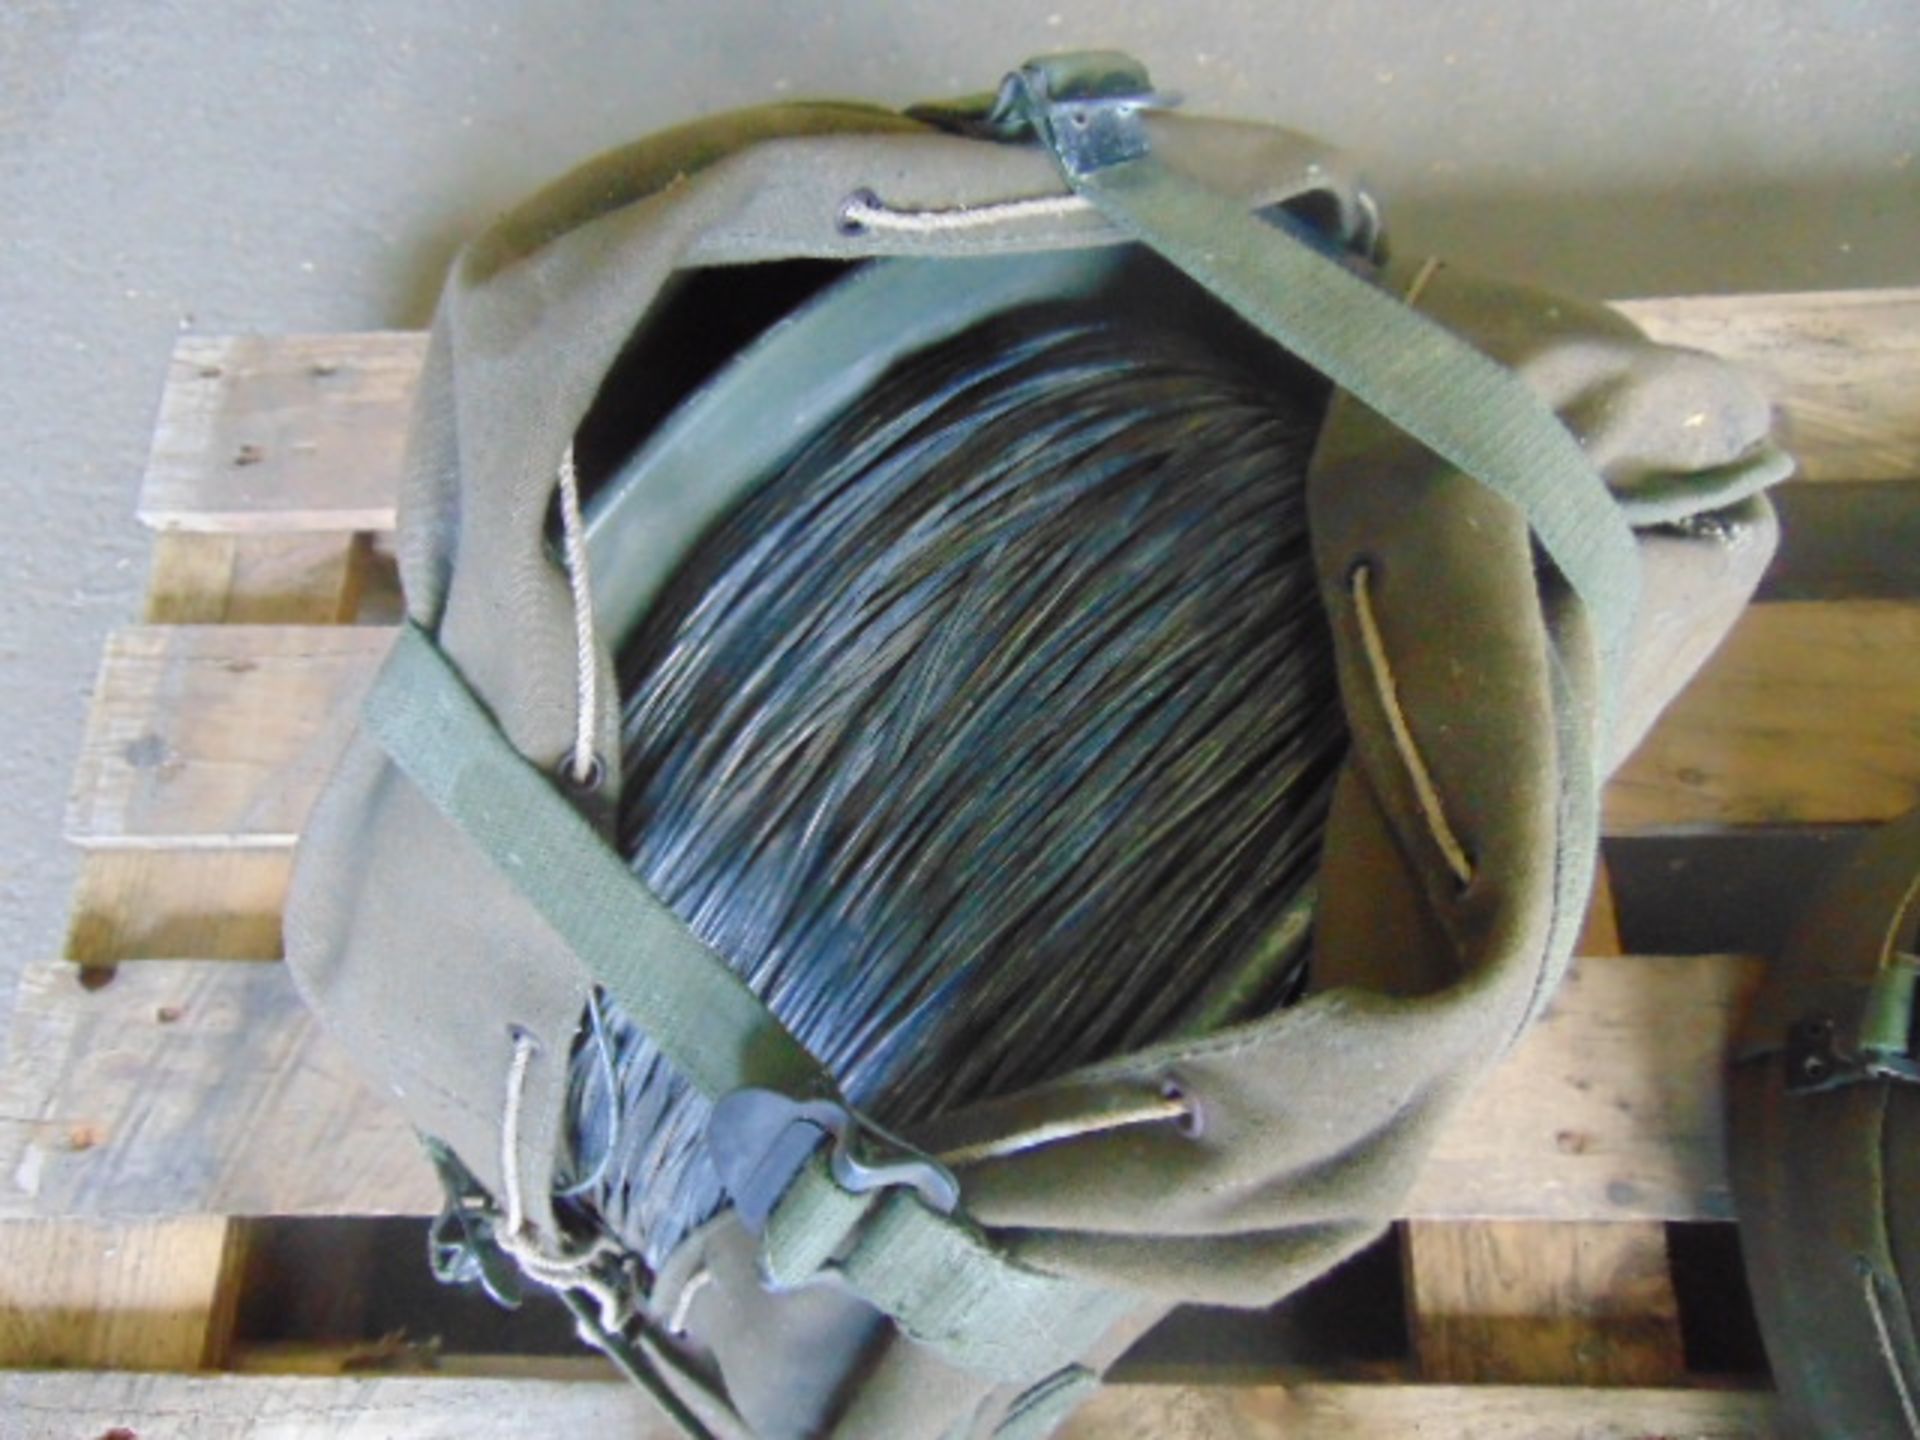 2 x Clansman D10 Cable Coils and 2 x Dispenser Coil Bags - Image 3 of 8